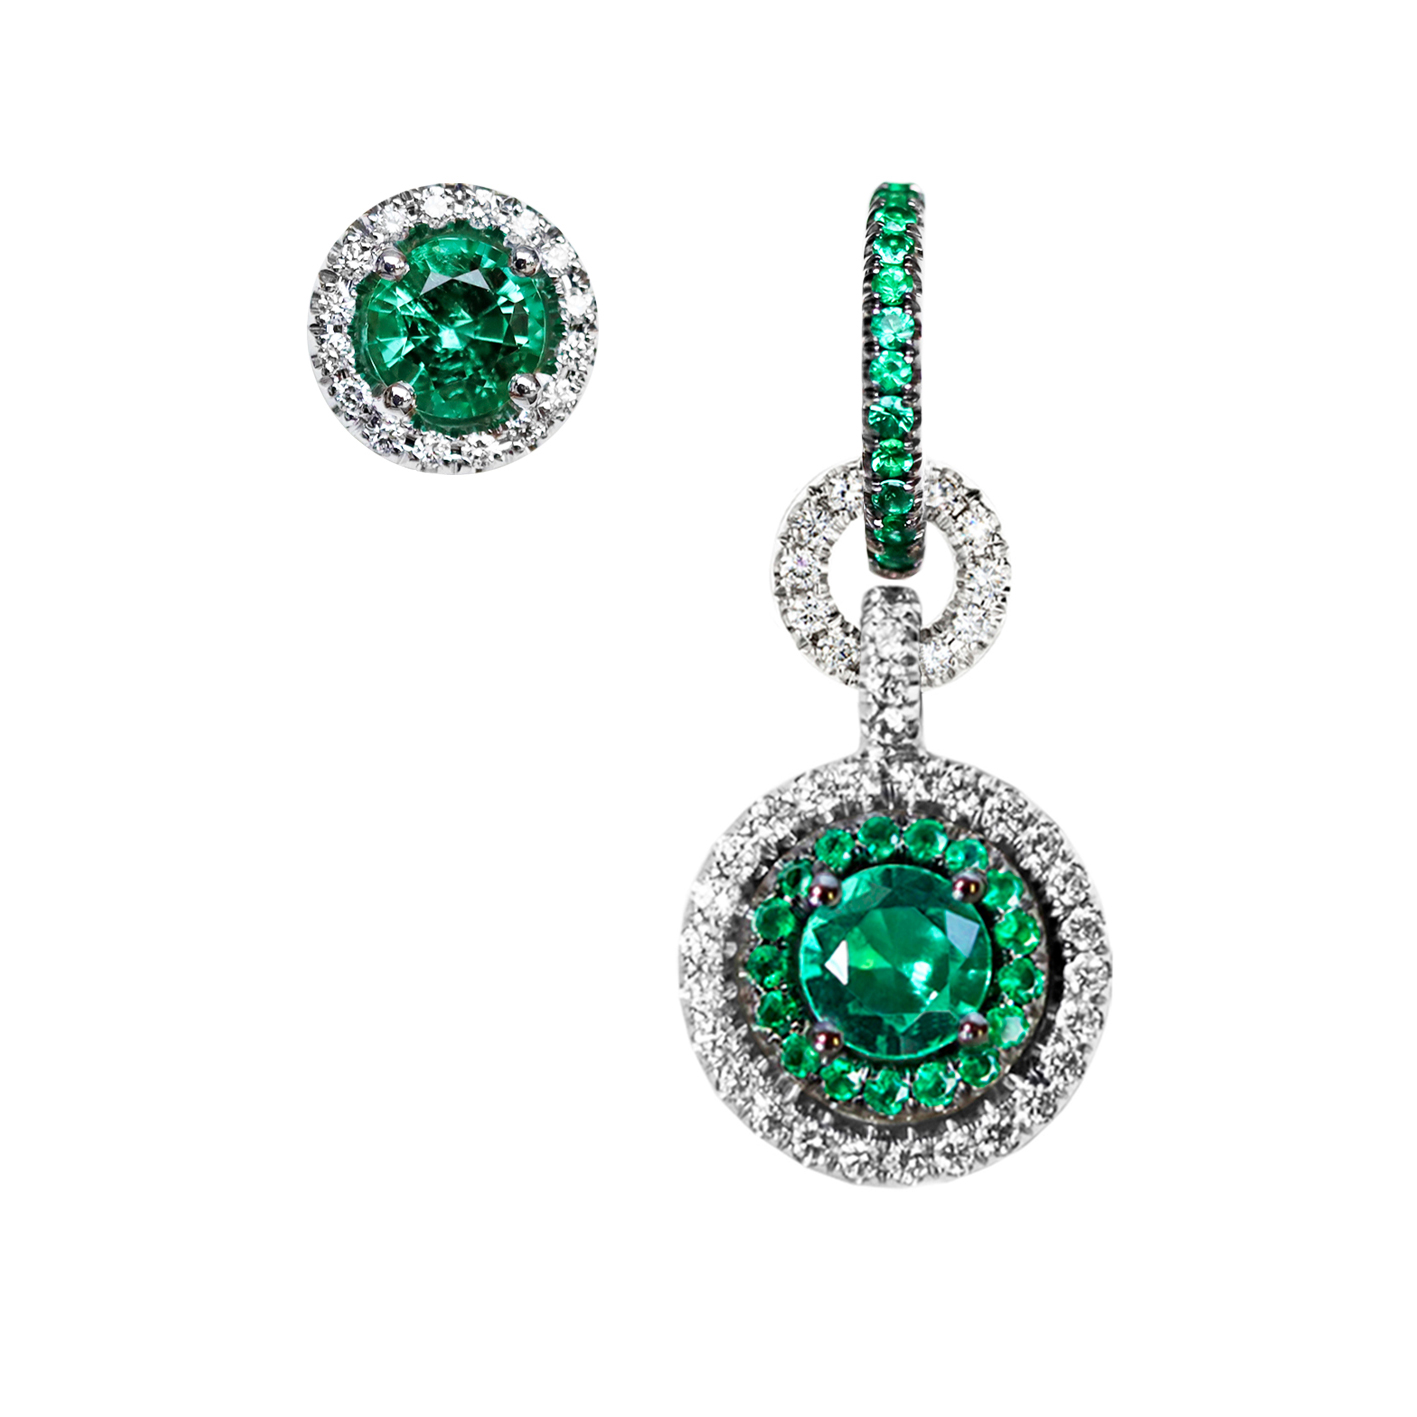 A pair of mismatched earrings with intense green Colombian emeralds and diamonds that can transform into a pendant with a pair of shorter earrings.